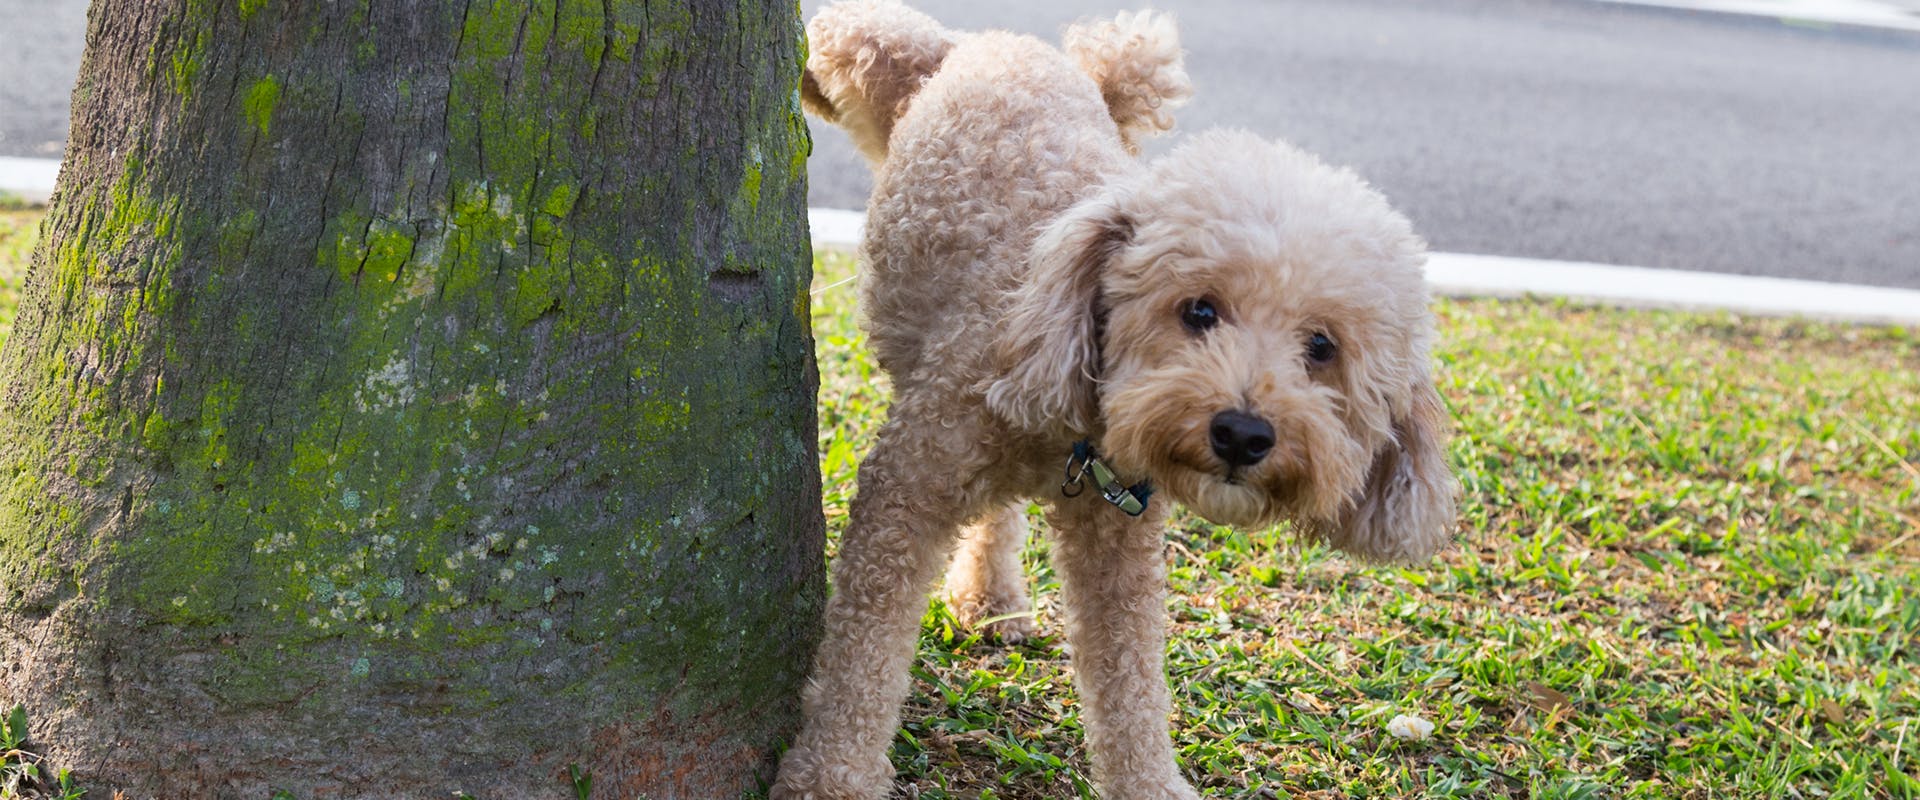 A dog peeing up against a tree